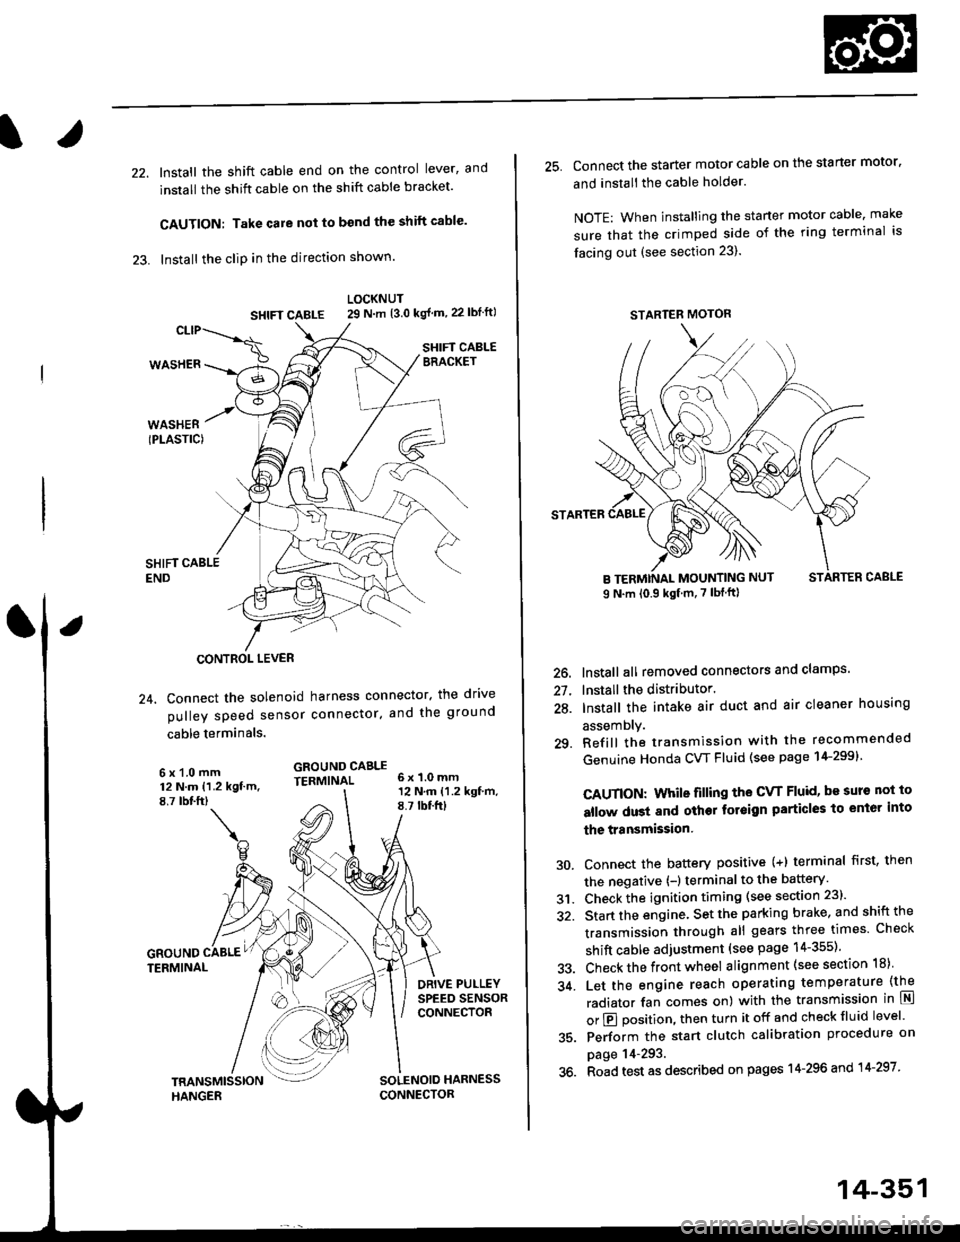 HONDA CIVIC 1998 6.G User Guide 22. Install the shift cable end on the control lever, and
install the shift cable on the shift cable bracket
CAUTION: Take care not to bend the shift cable
23. lnstall the clip in the direction show